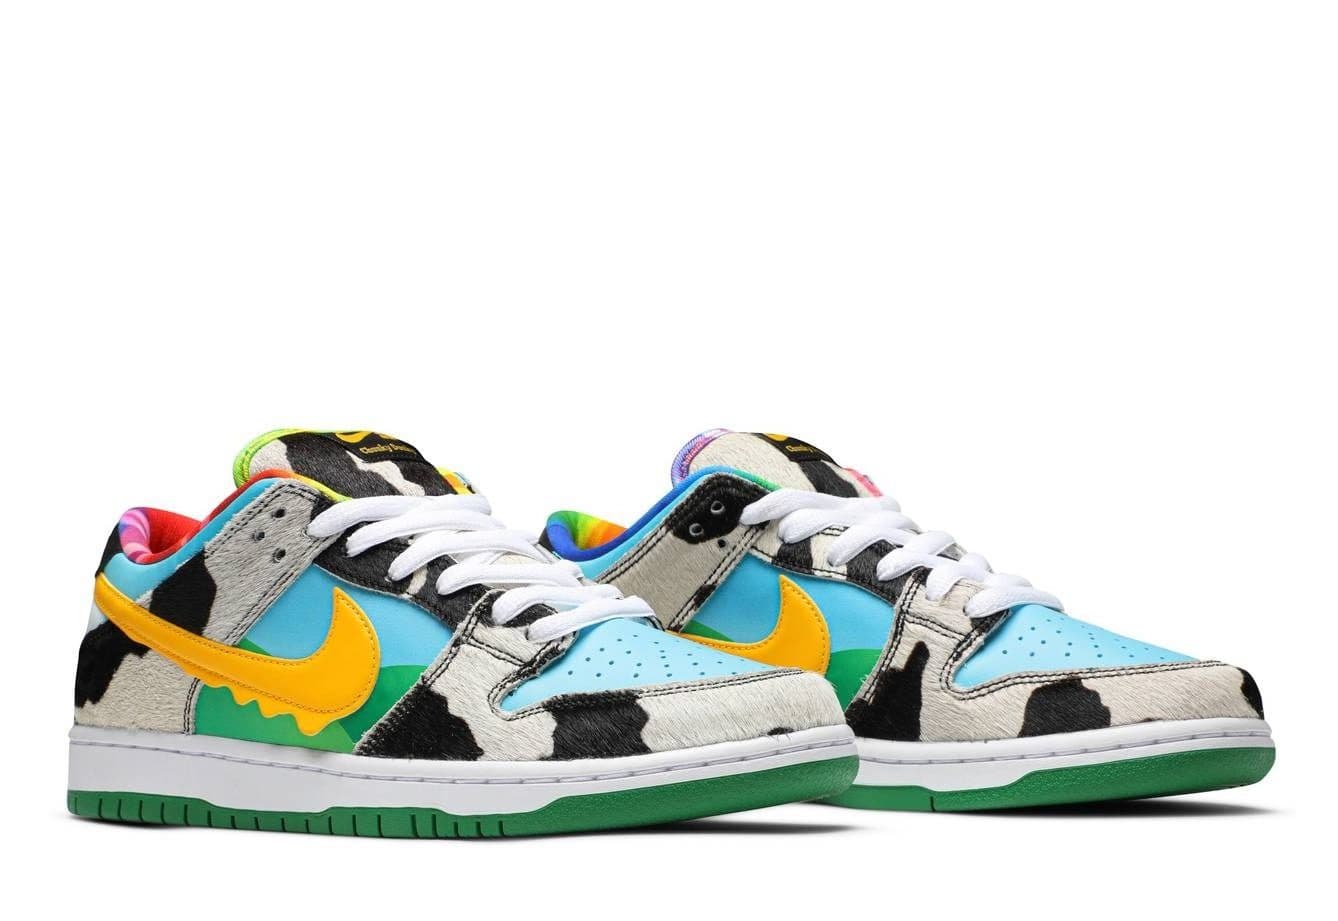 nike sb low ben and jerry